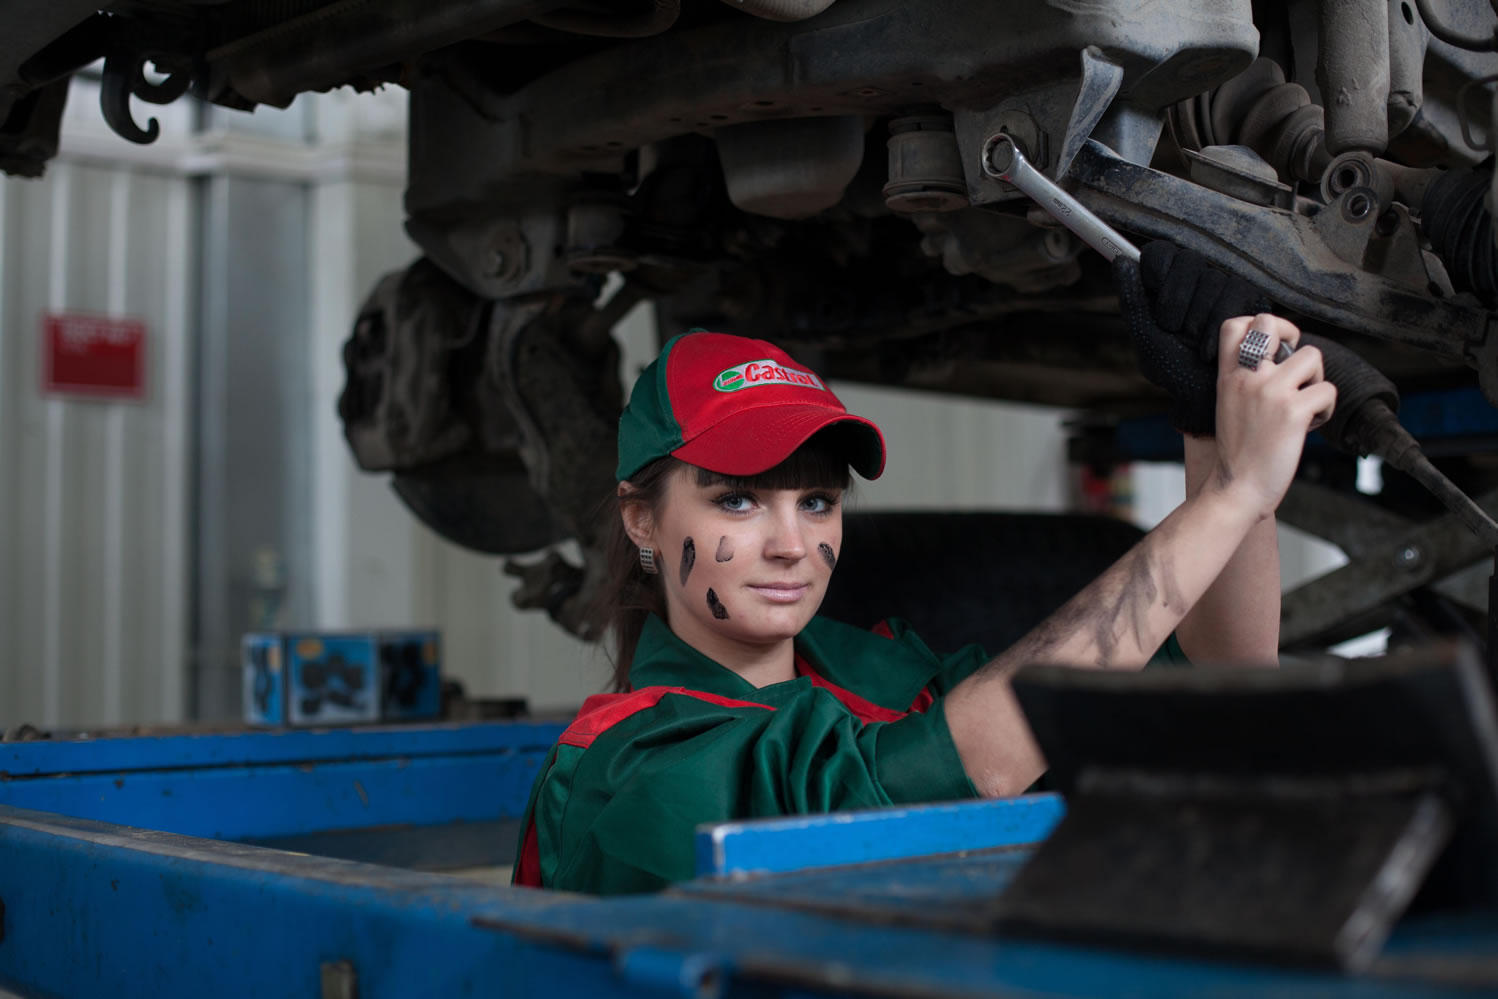 10 Reasons to Invest in an Automotive Franchise